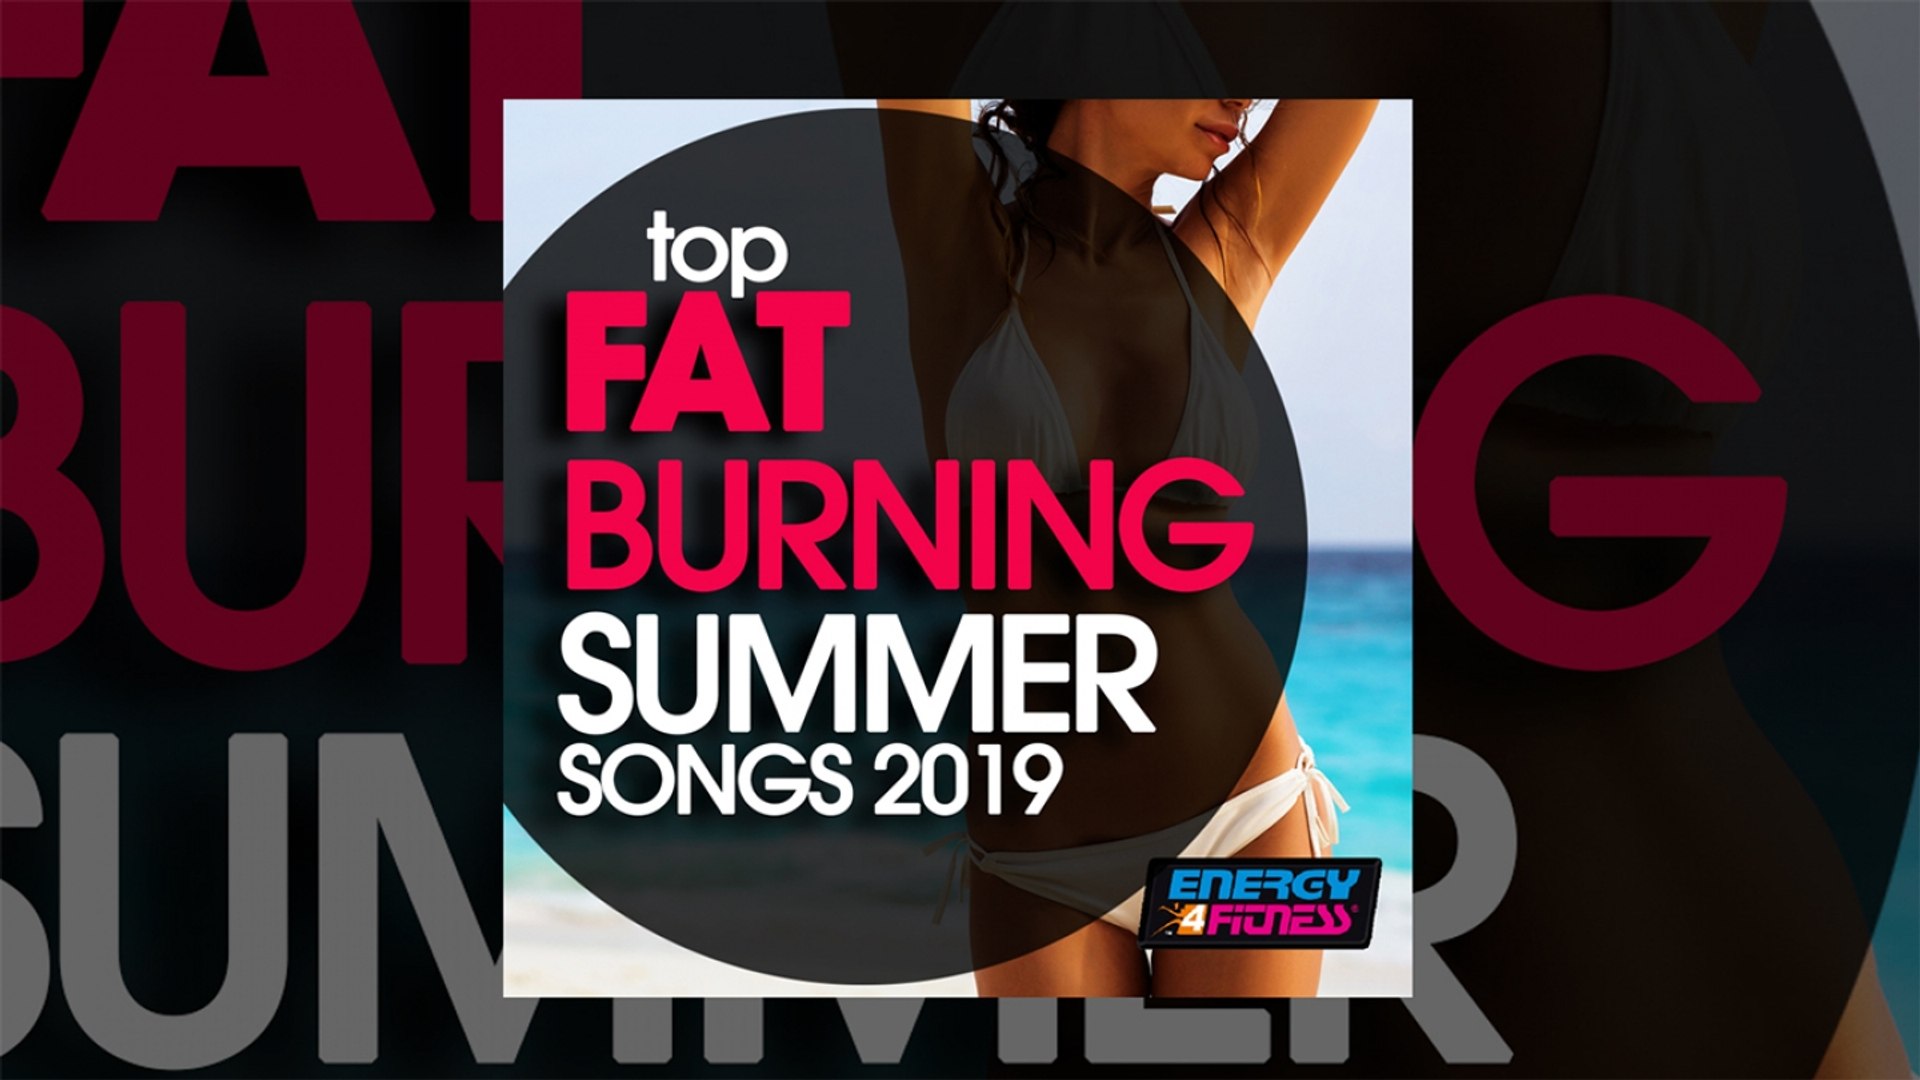 ⁣E4F - Top Fat Burning Summer Songs 2019 - Fitness & Music 2019